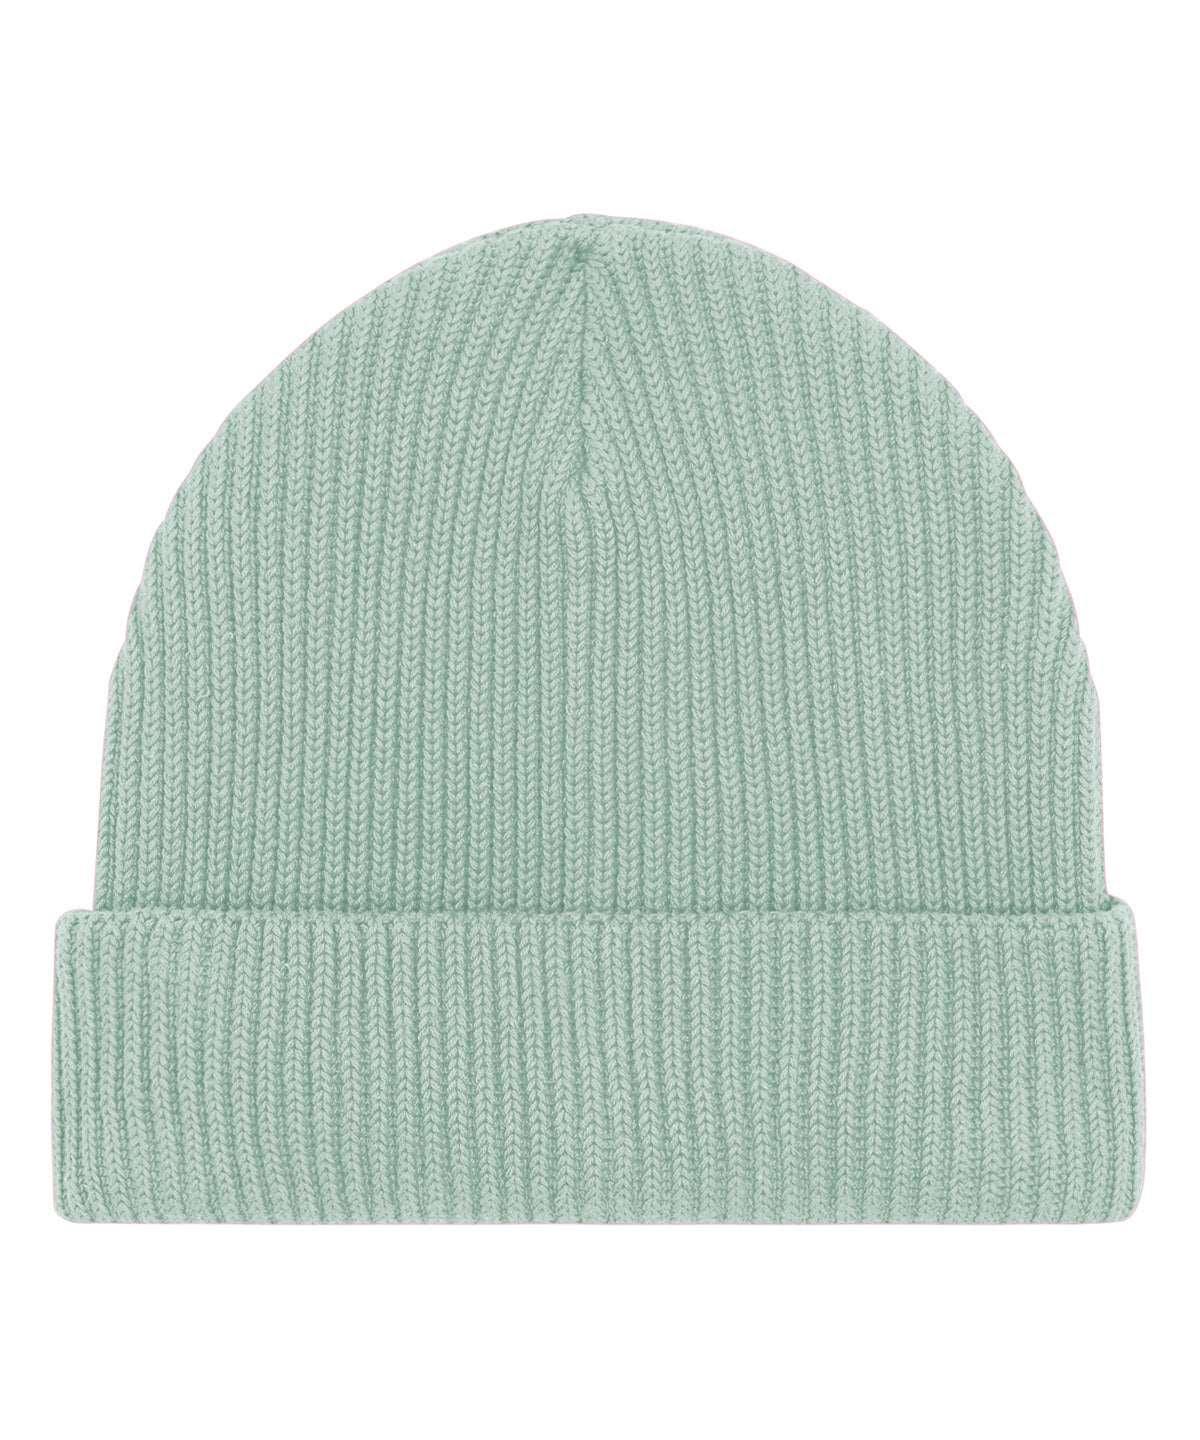 Aloe - Fisherman beanie in unisex fit (STAU771) Hats Stanley/Stella Exclusives, Headwear, New Colours For 2022, New In Autumn Winter, New In Mid Year, Organic & Conscious, Raladeal - Stanley Stella, Stanley/ Stella, Winter Essentials Schoolwear Centres